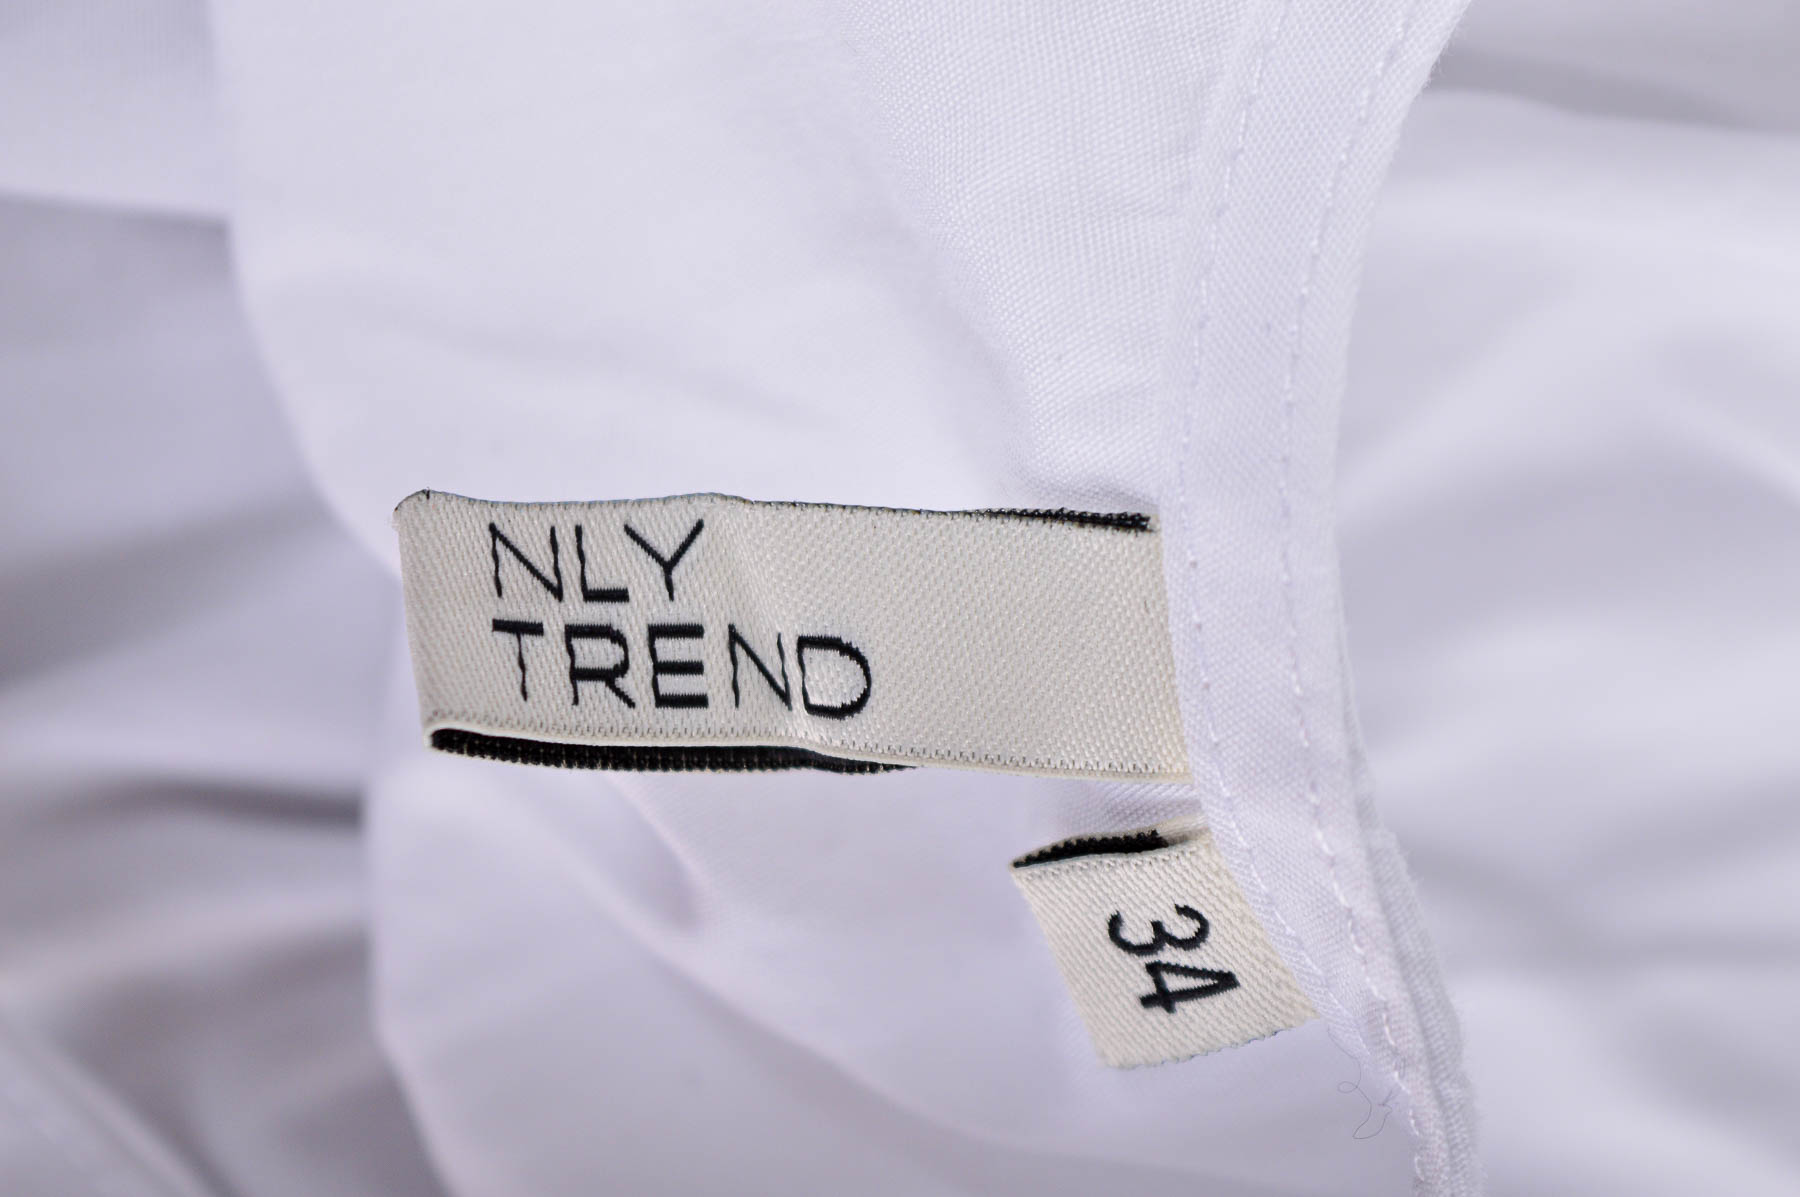 Dress - NLY Trend - 2